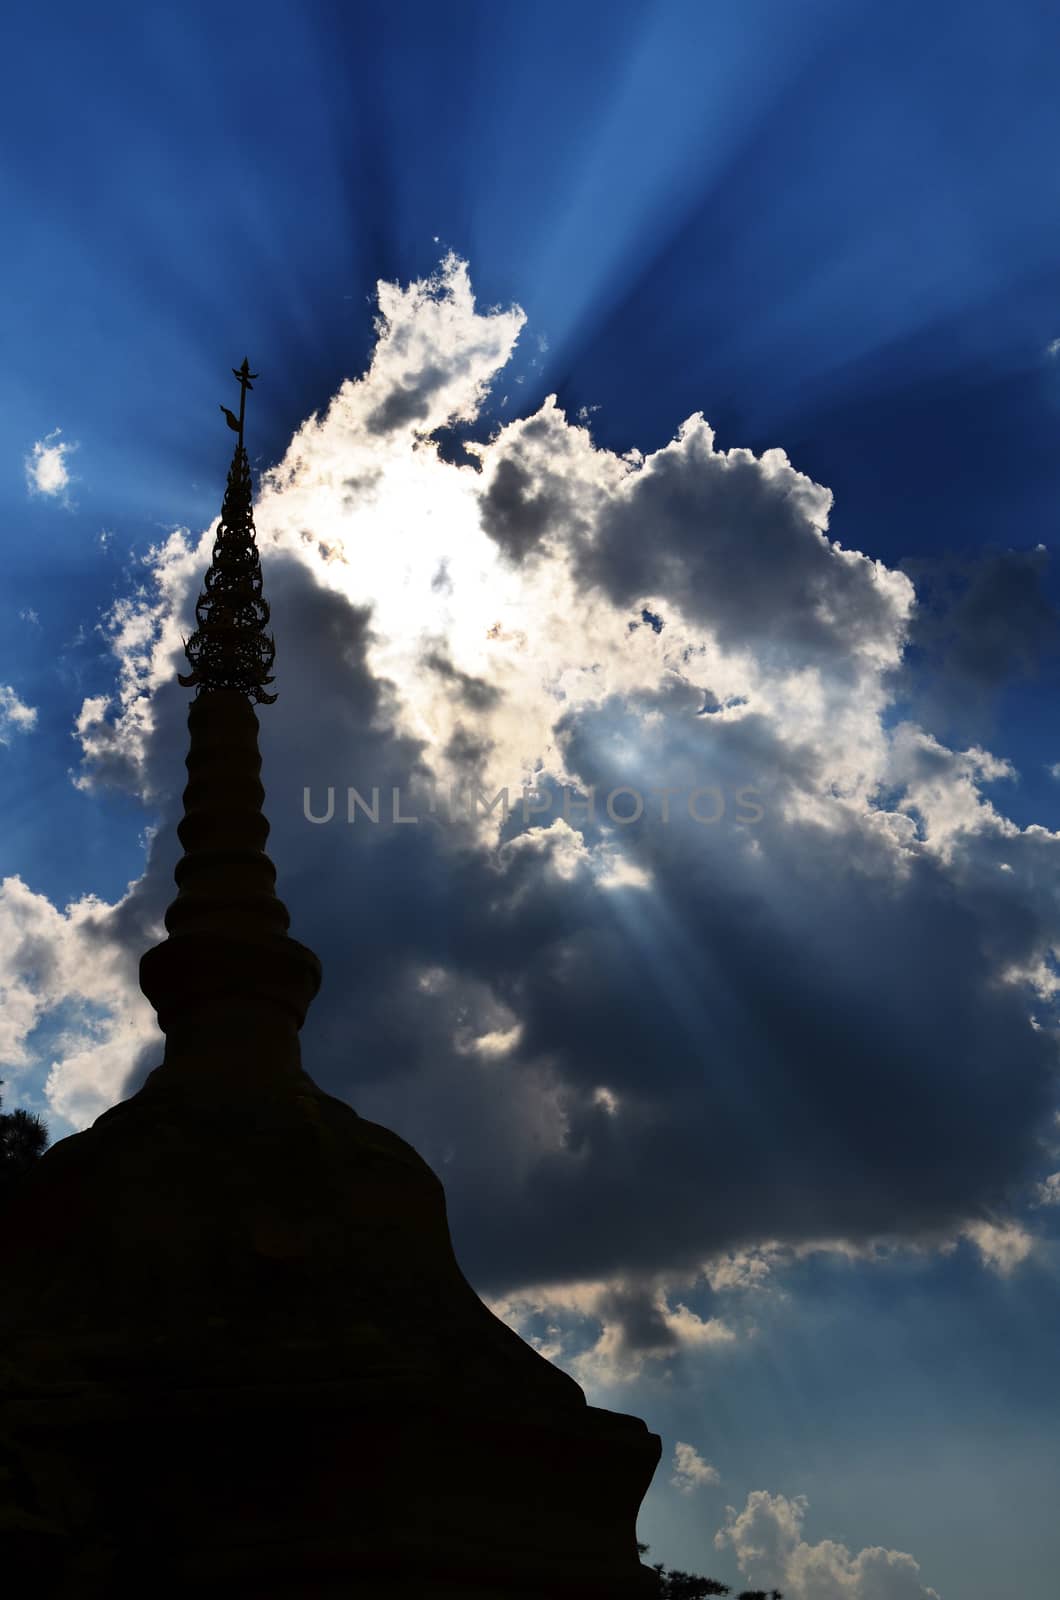 Gloden Phra That on Hill above Village Series 1_4, Sunlight, Silhouette, Cloud and Blue Sky, Chiang Mai province, Thailand